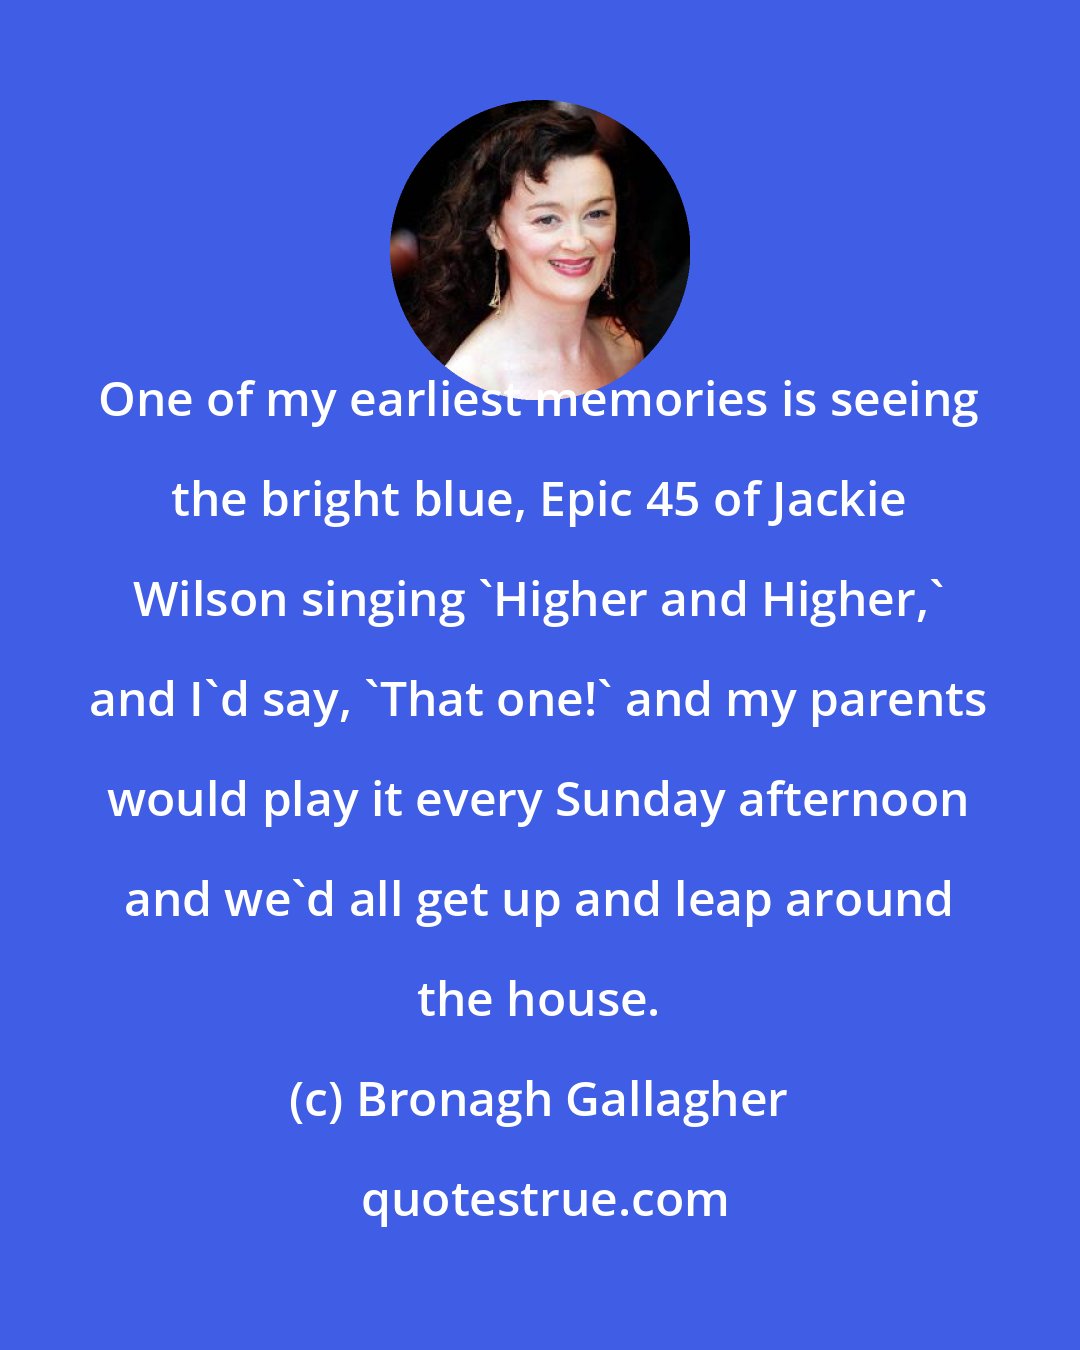 Bronagh Gallagher: One of my earliest memories is seeing the bright blue, Epic 45 of Jackie Wilson singing 'Higher and Higher,' and I'd say, 'That one!' and my parents would play it every Sunday afternoon and we'd all get up and leap around the house.